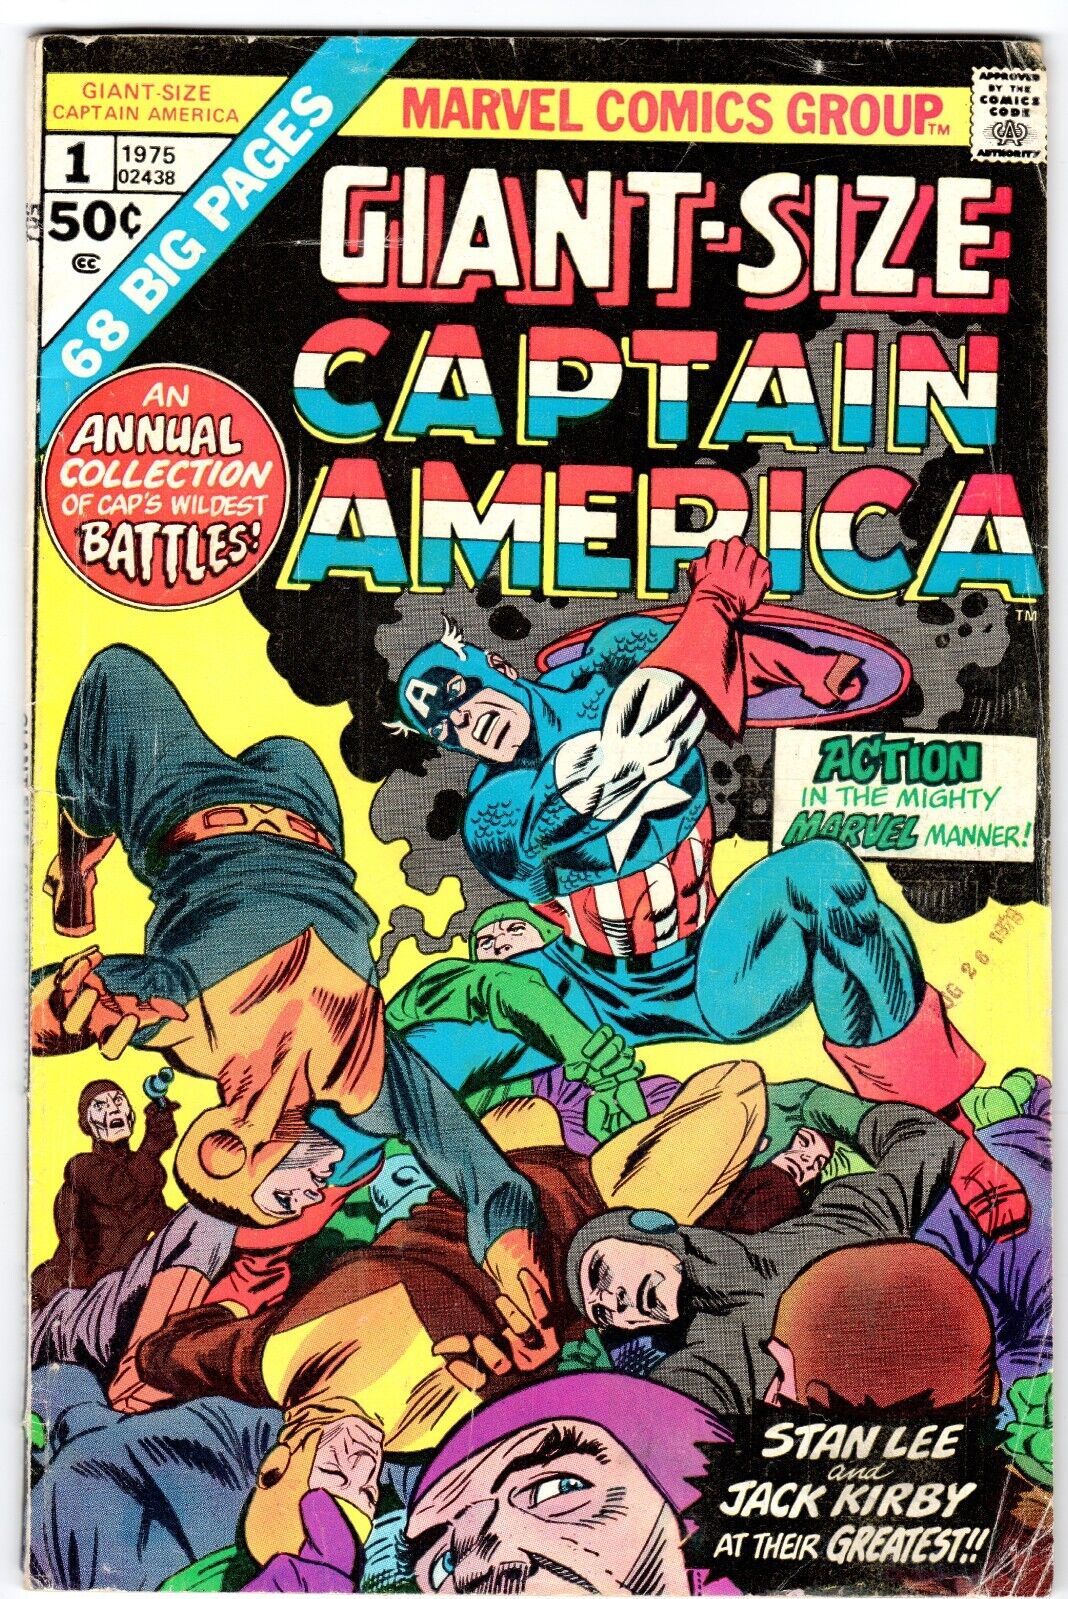 GIANT-SIZE CAPTAIN AMERICA #1    JACK KIRBY Art    STAN LEE Stories   VG (4.0)